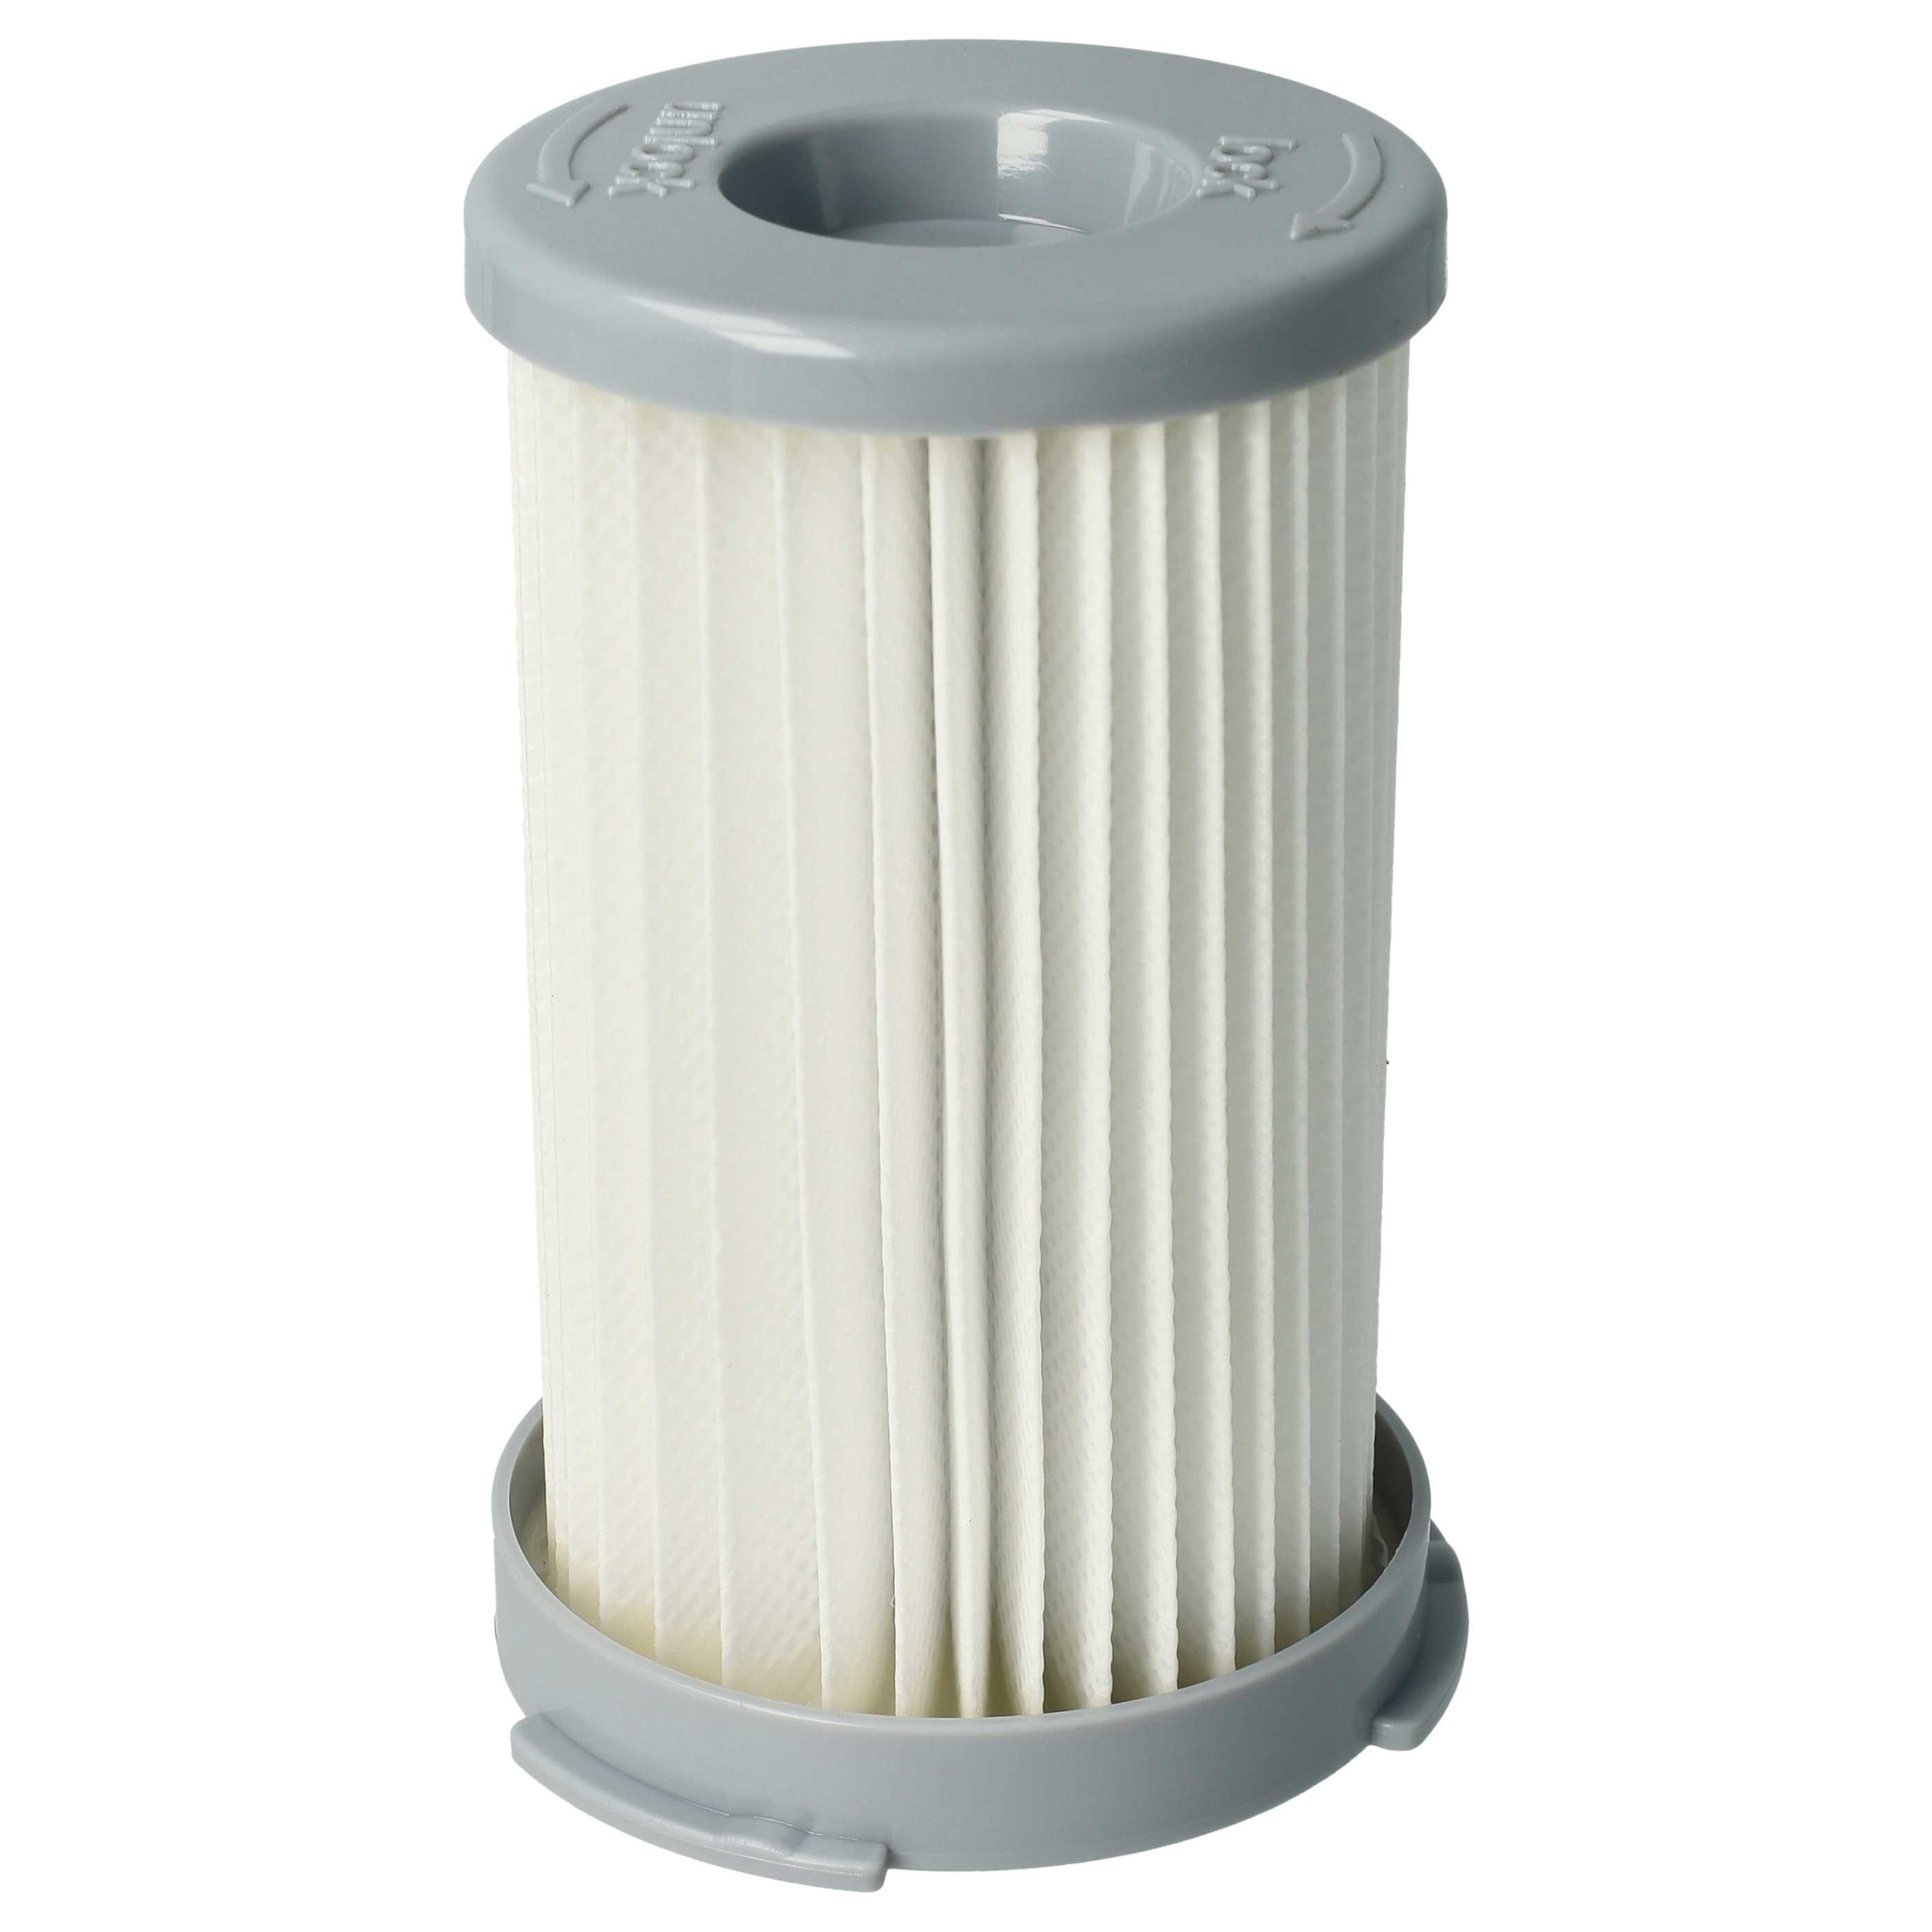 1x exhaust filter replaces Electrolux EF75B for AEG/Electrolux Vacuum Cleaner